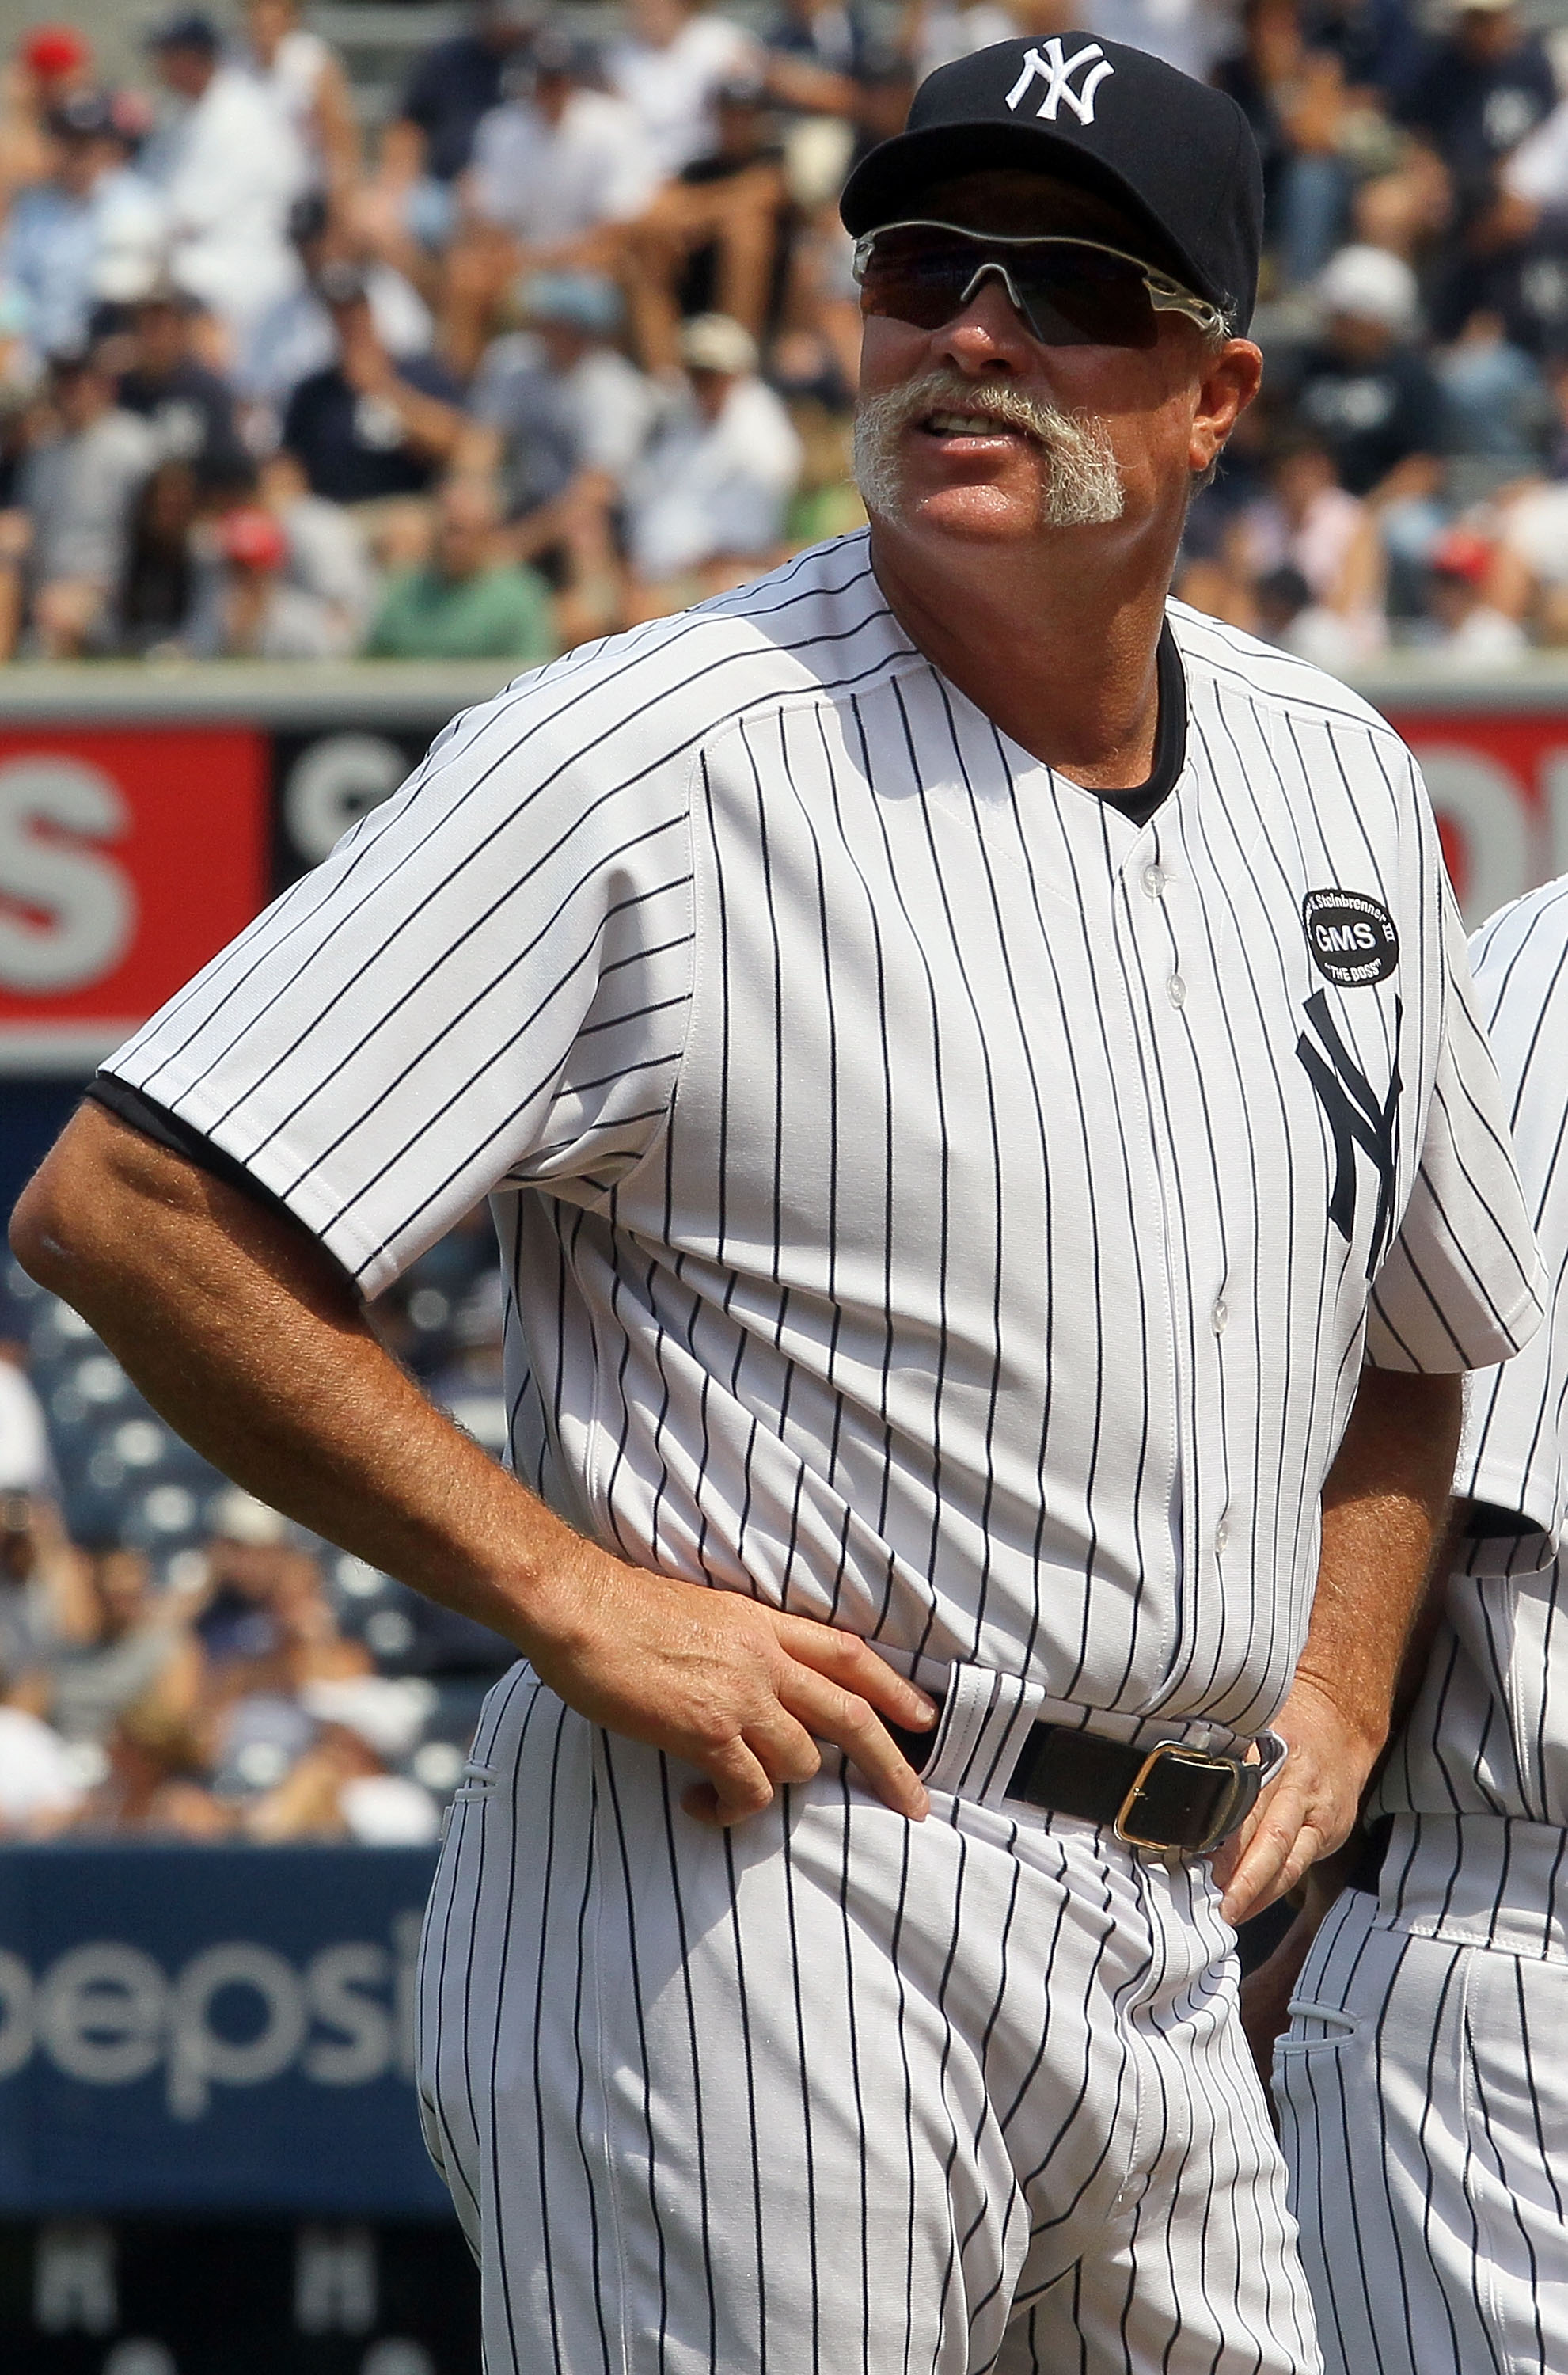 Retired New York Yankee pitcher Goose Gossage tips his cap while